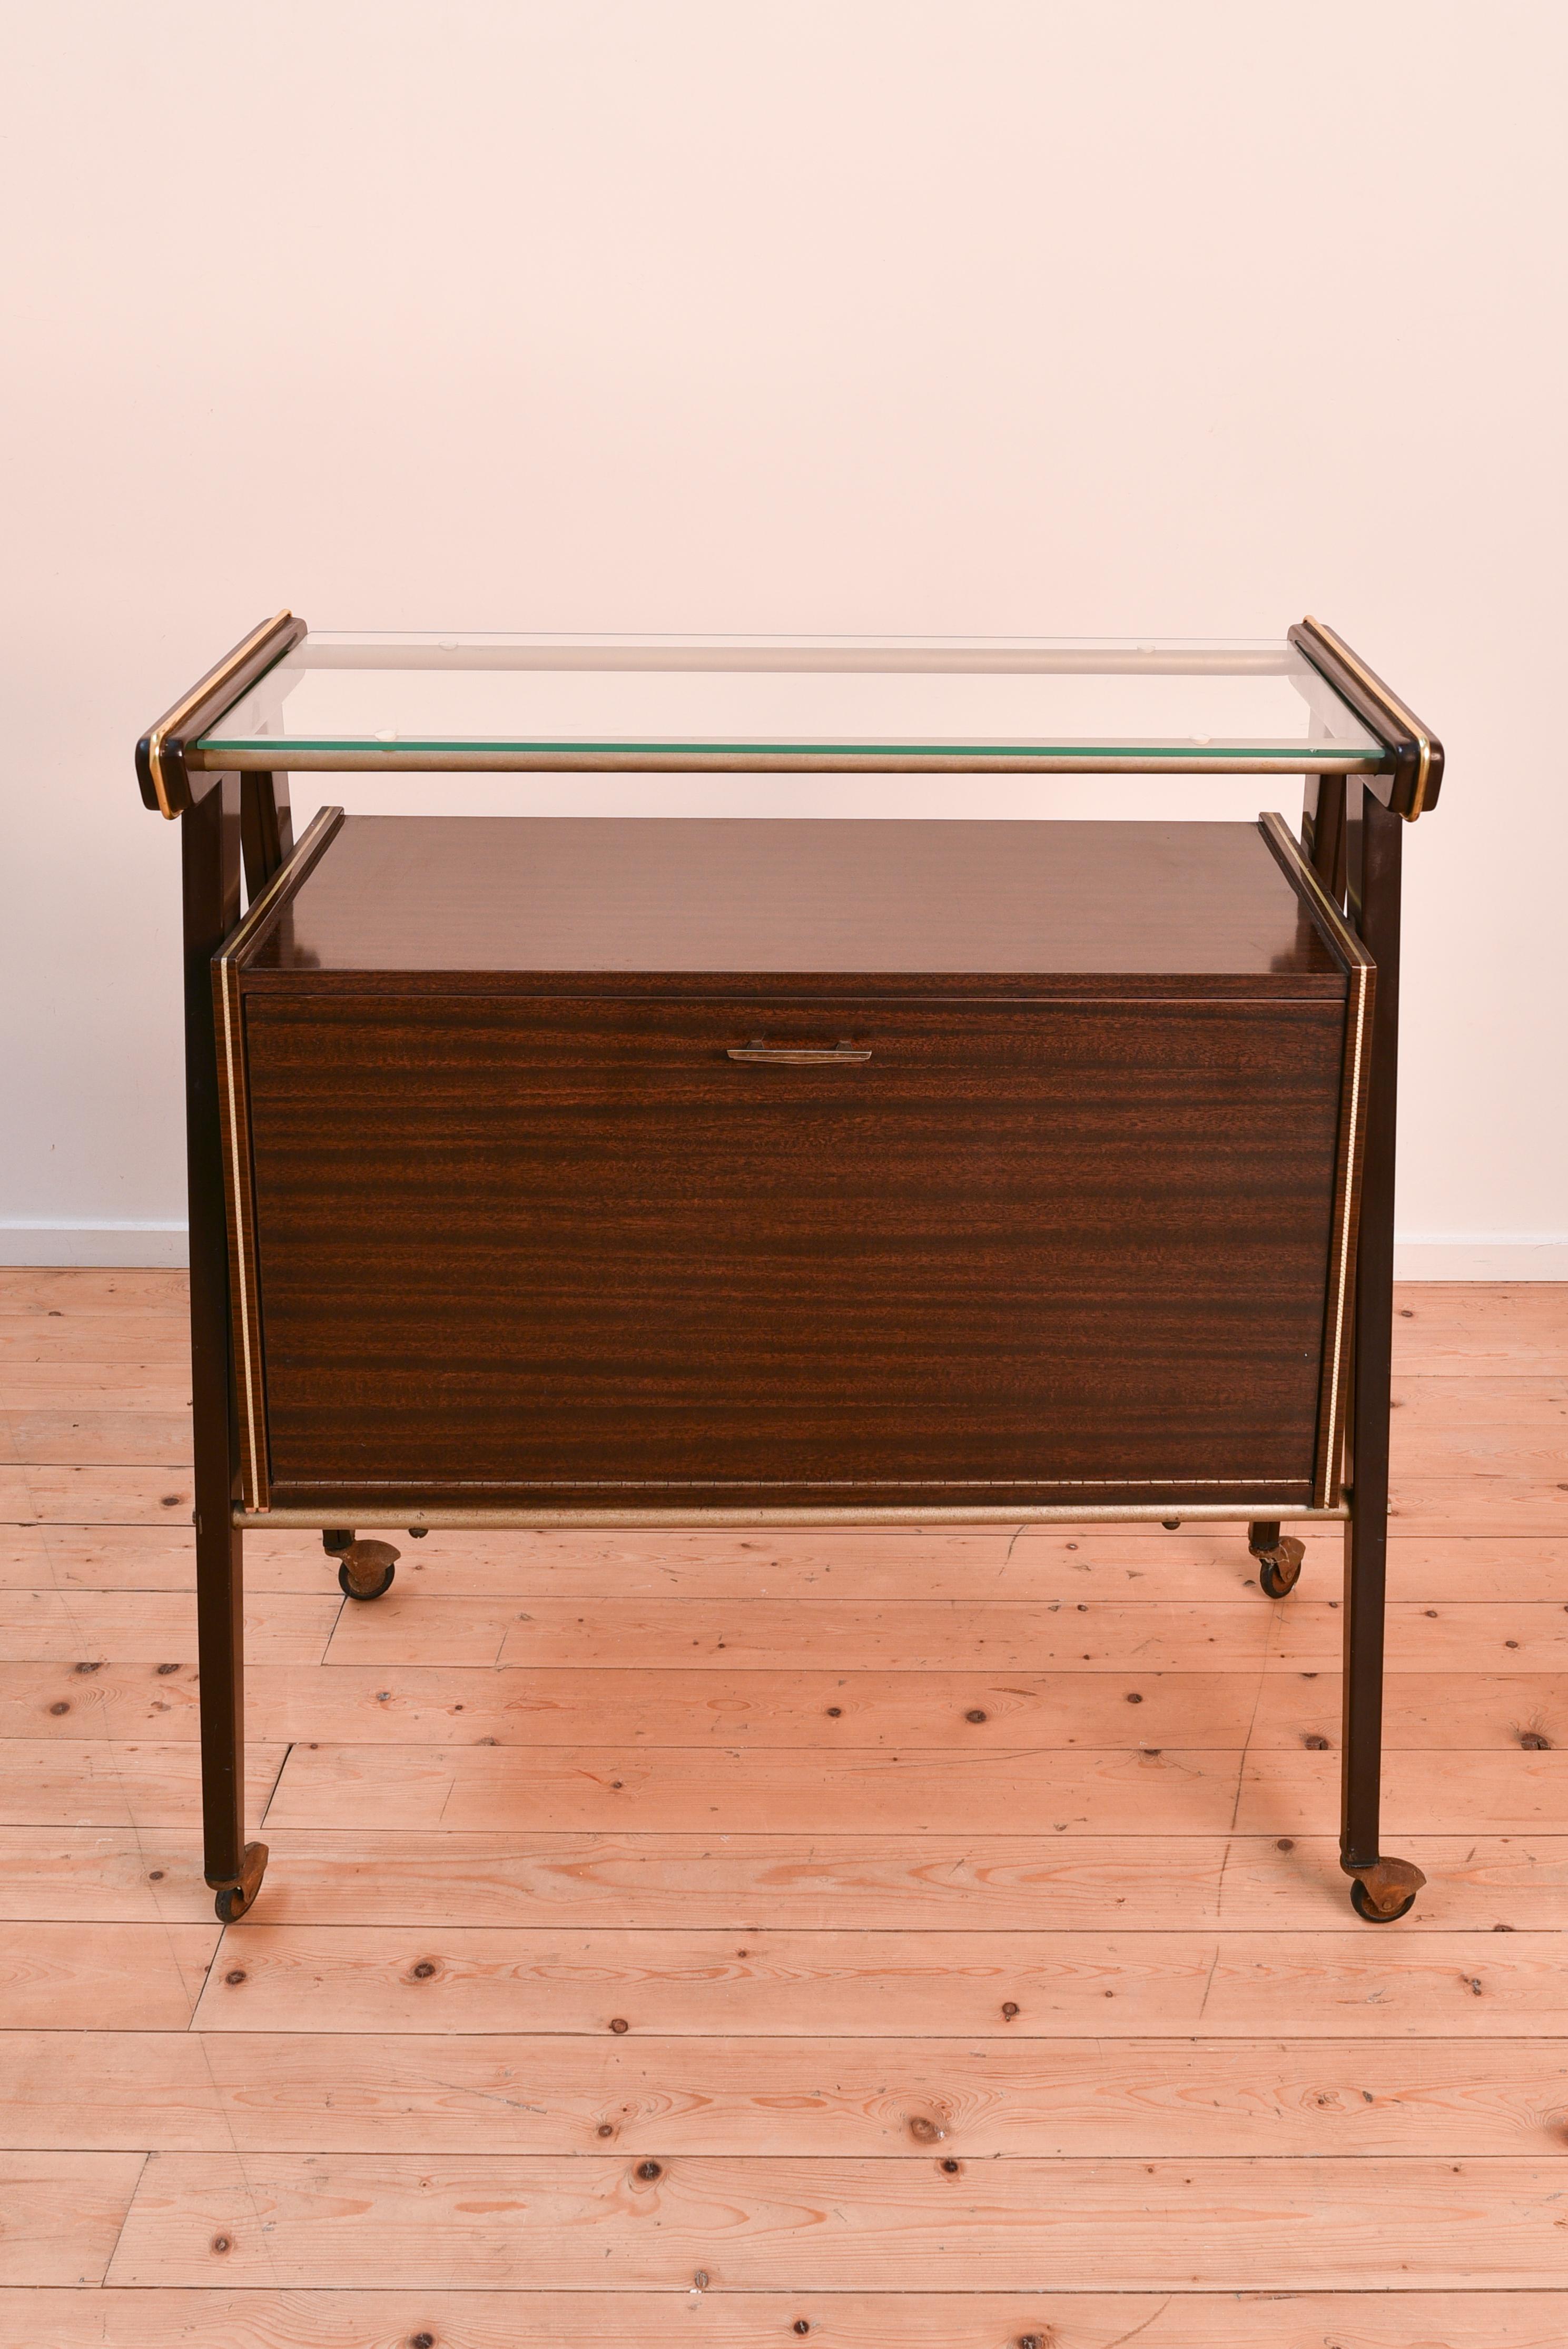 This very elegant bar cart was made in the 1960s by Rama Mobili and has a glass shelf and a cabinet underneath with a little light bulb on the inside. When you open the cabinet door the light automatically switches on. 

The bar cart has some